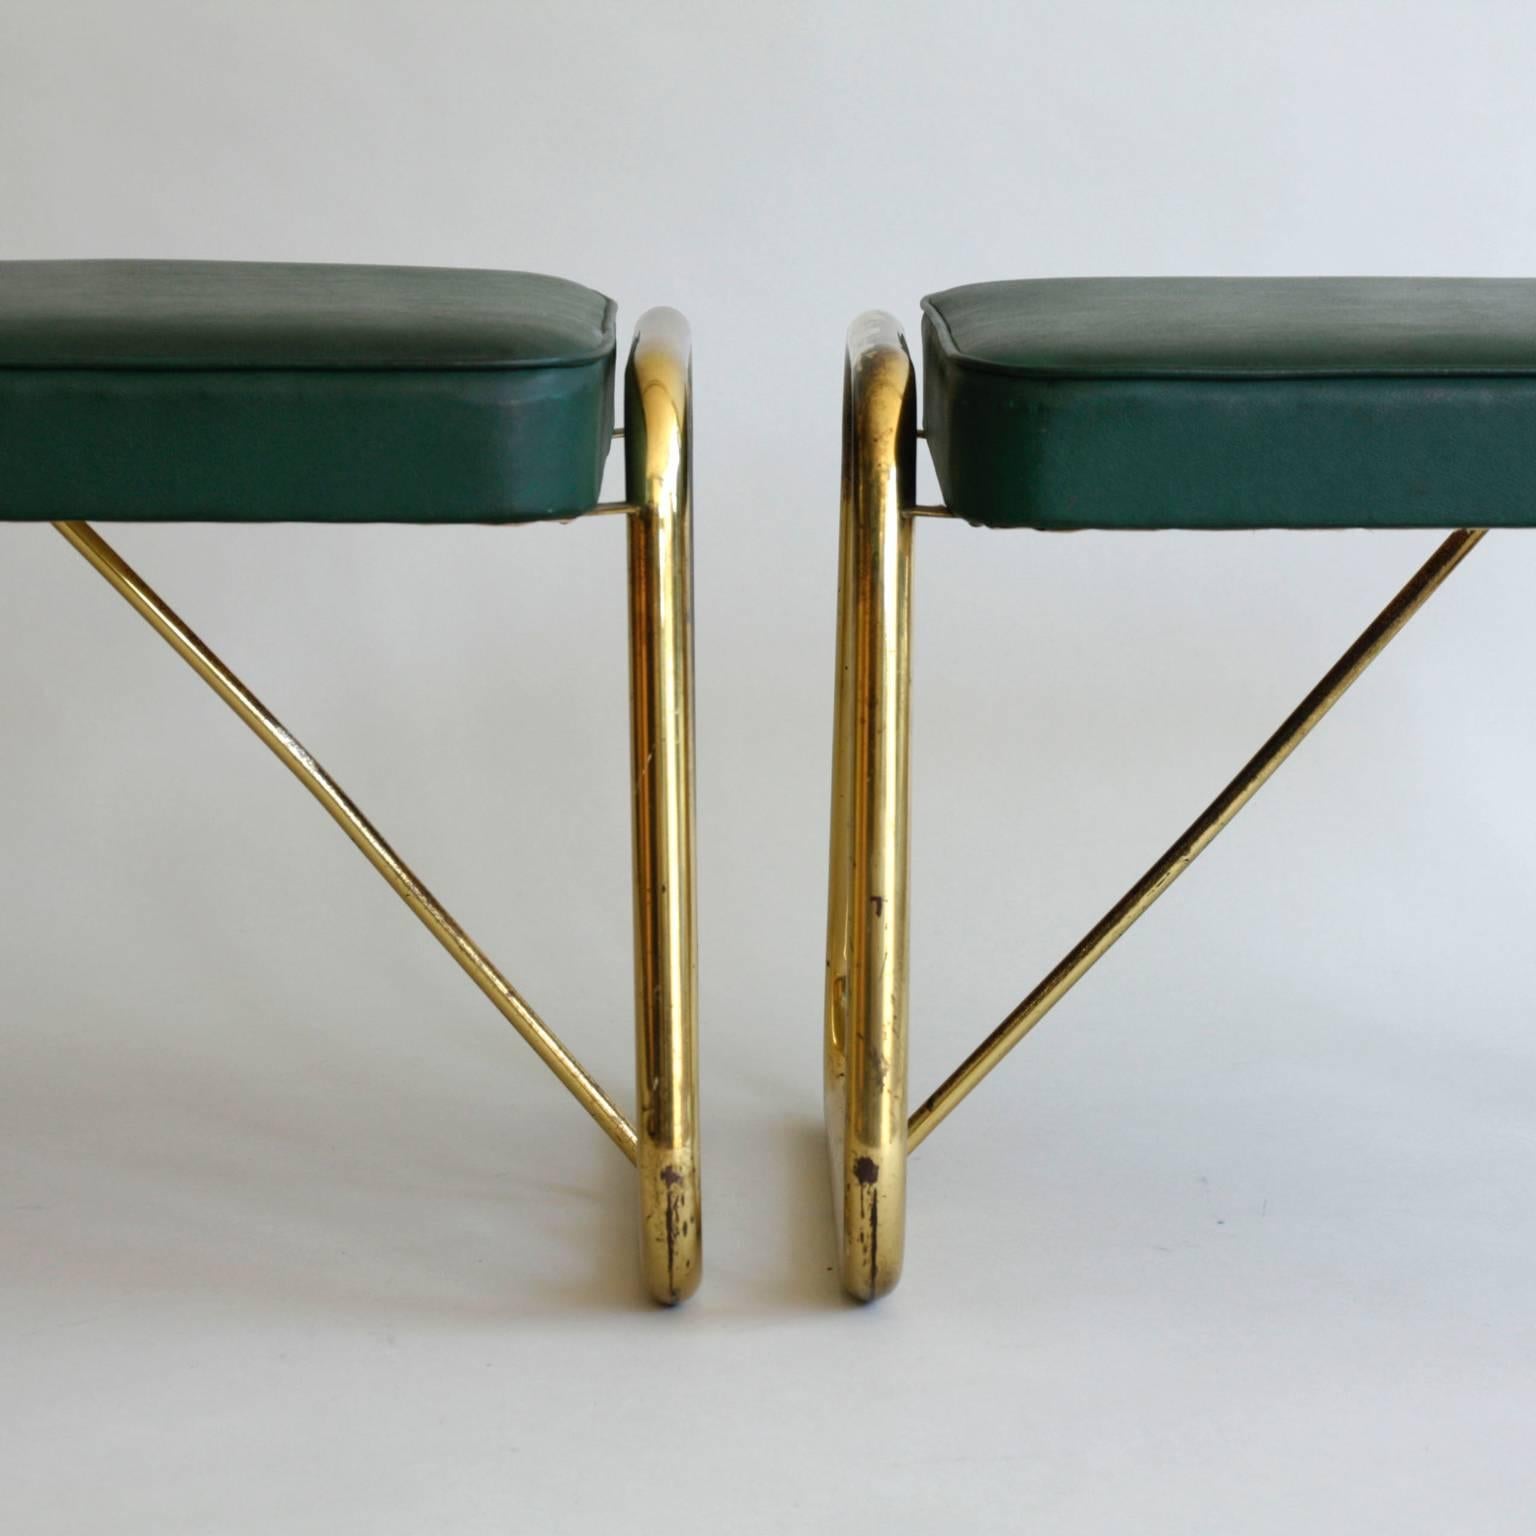 20th Century Pair of 1950s Italian Footstools or Ottomans, Brass and Green